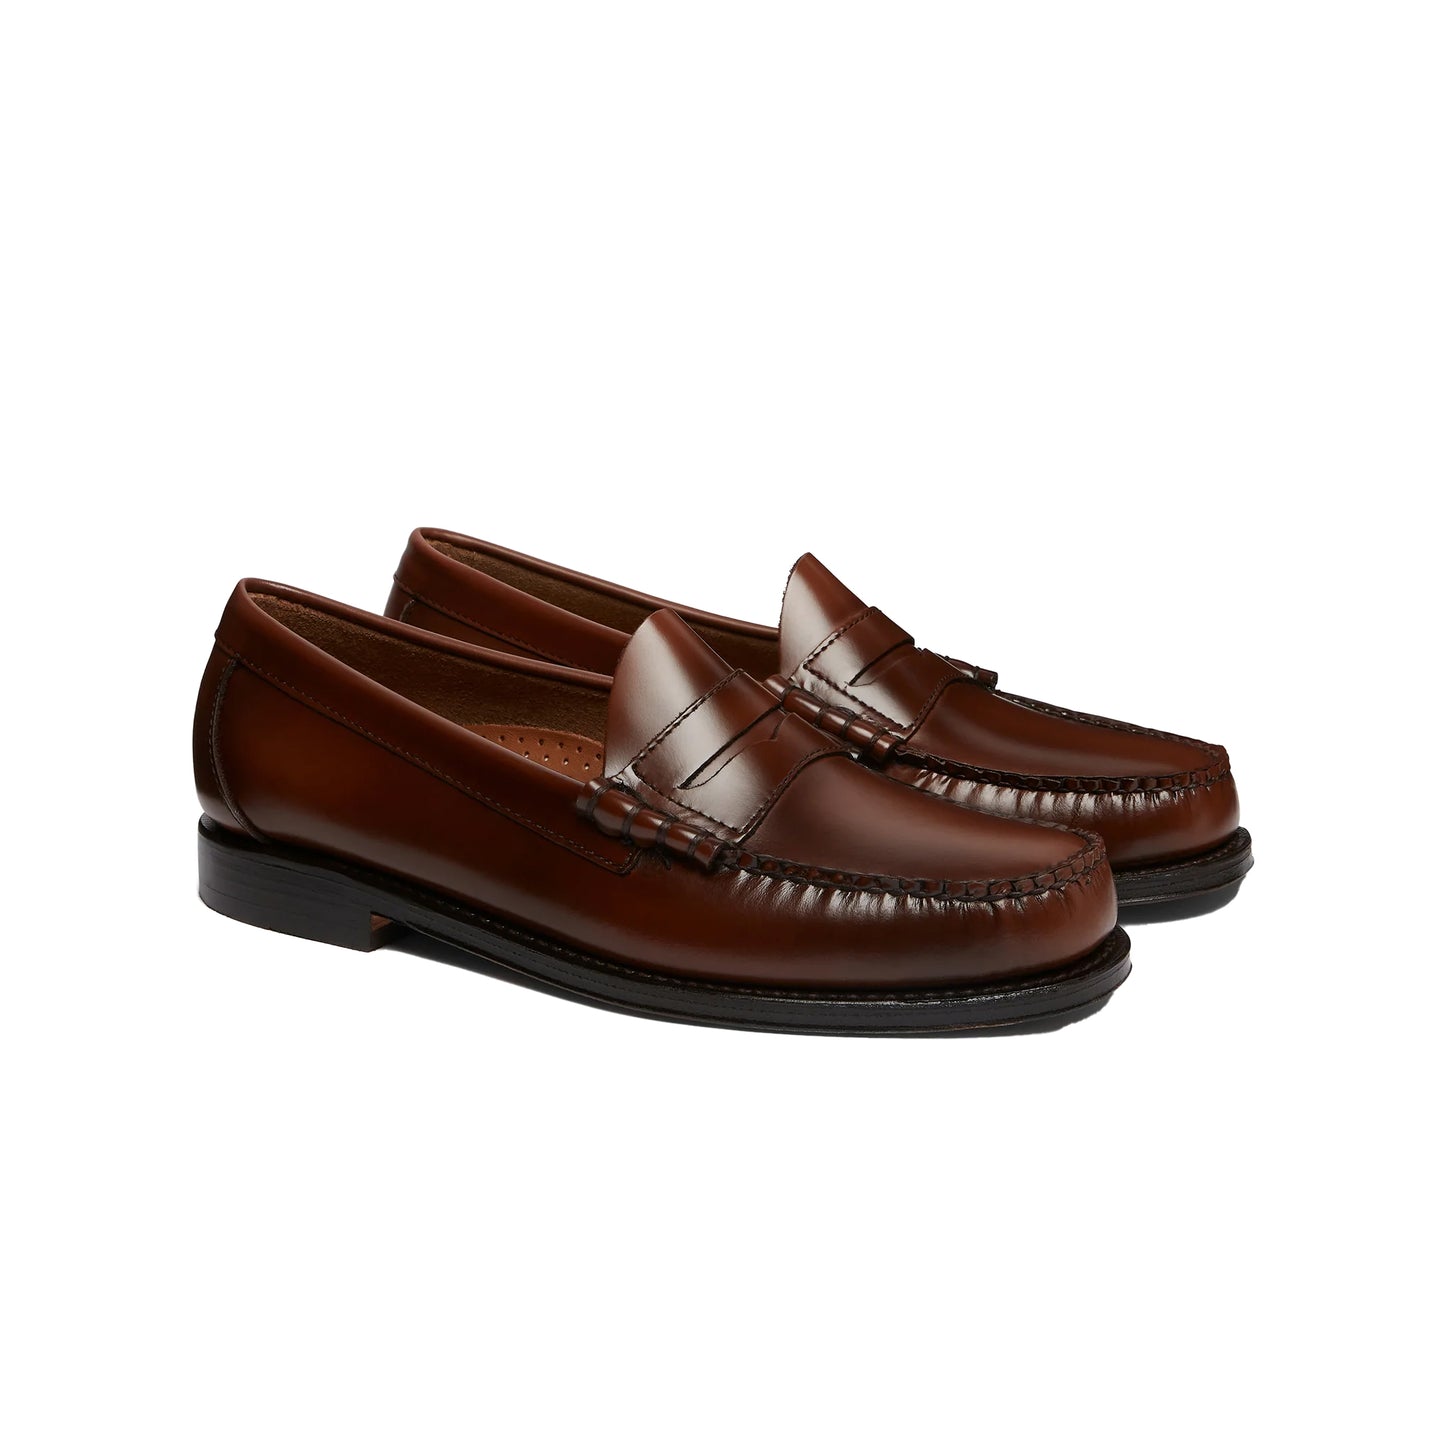 G.H.Bass Weejuns Larson Penny Loafer - Mid Brown Leather